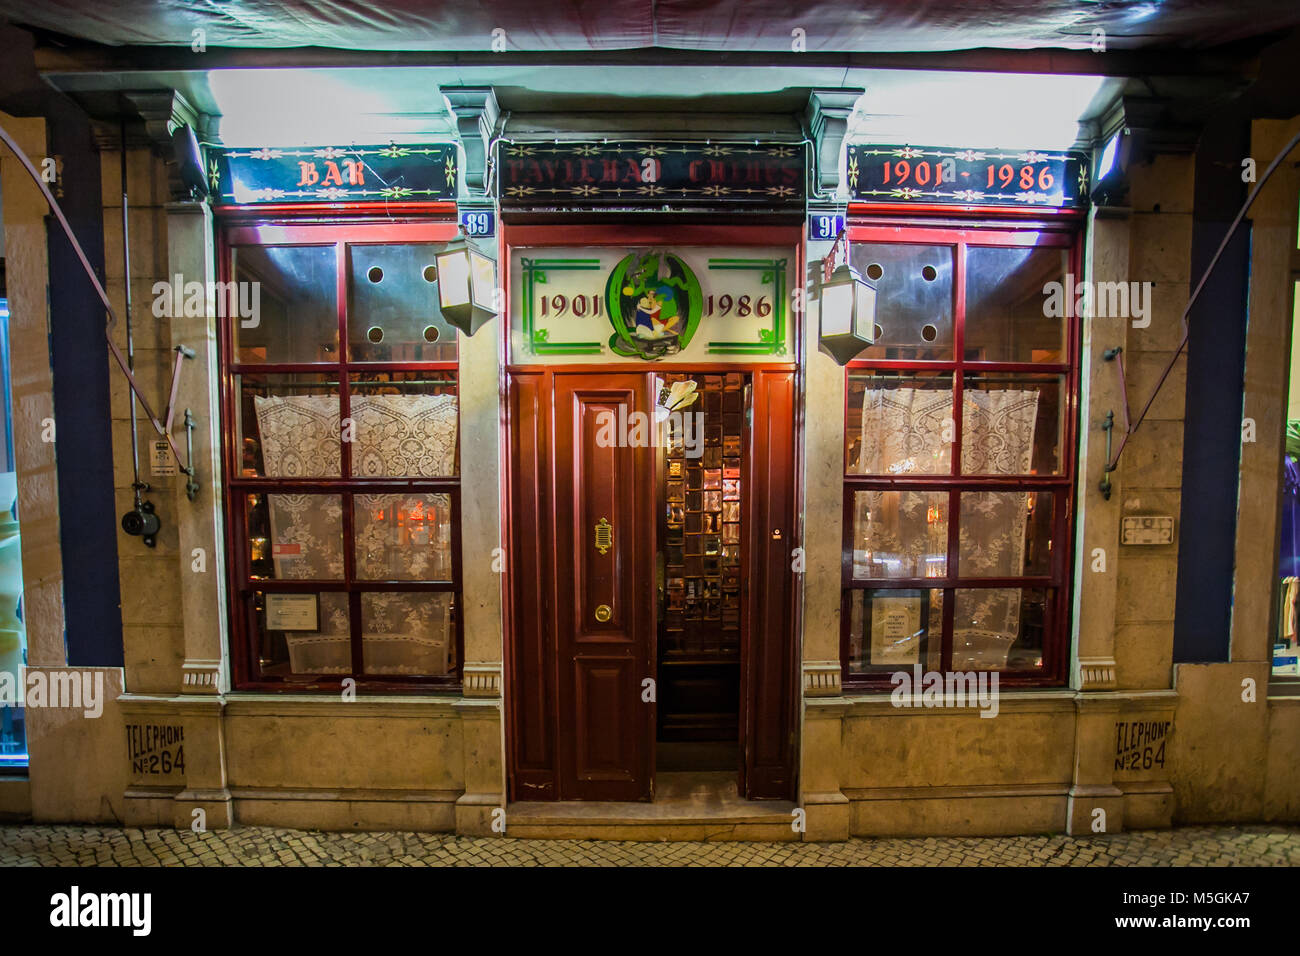 LISBON, PORTUGAL - January 31, 2011: the historic Pavilhao Chines bar where you can find all kinds of collections in the Barrio Alto neighborhood in L Stock Photo